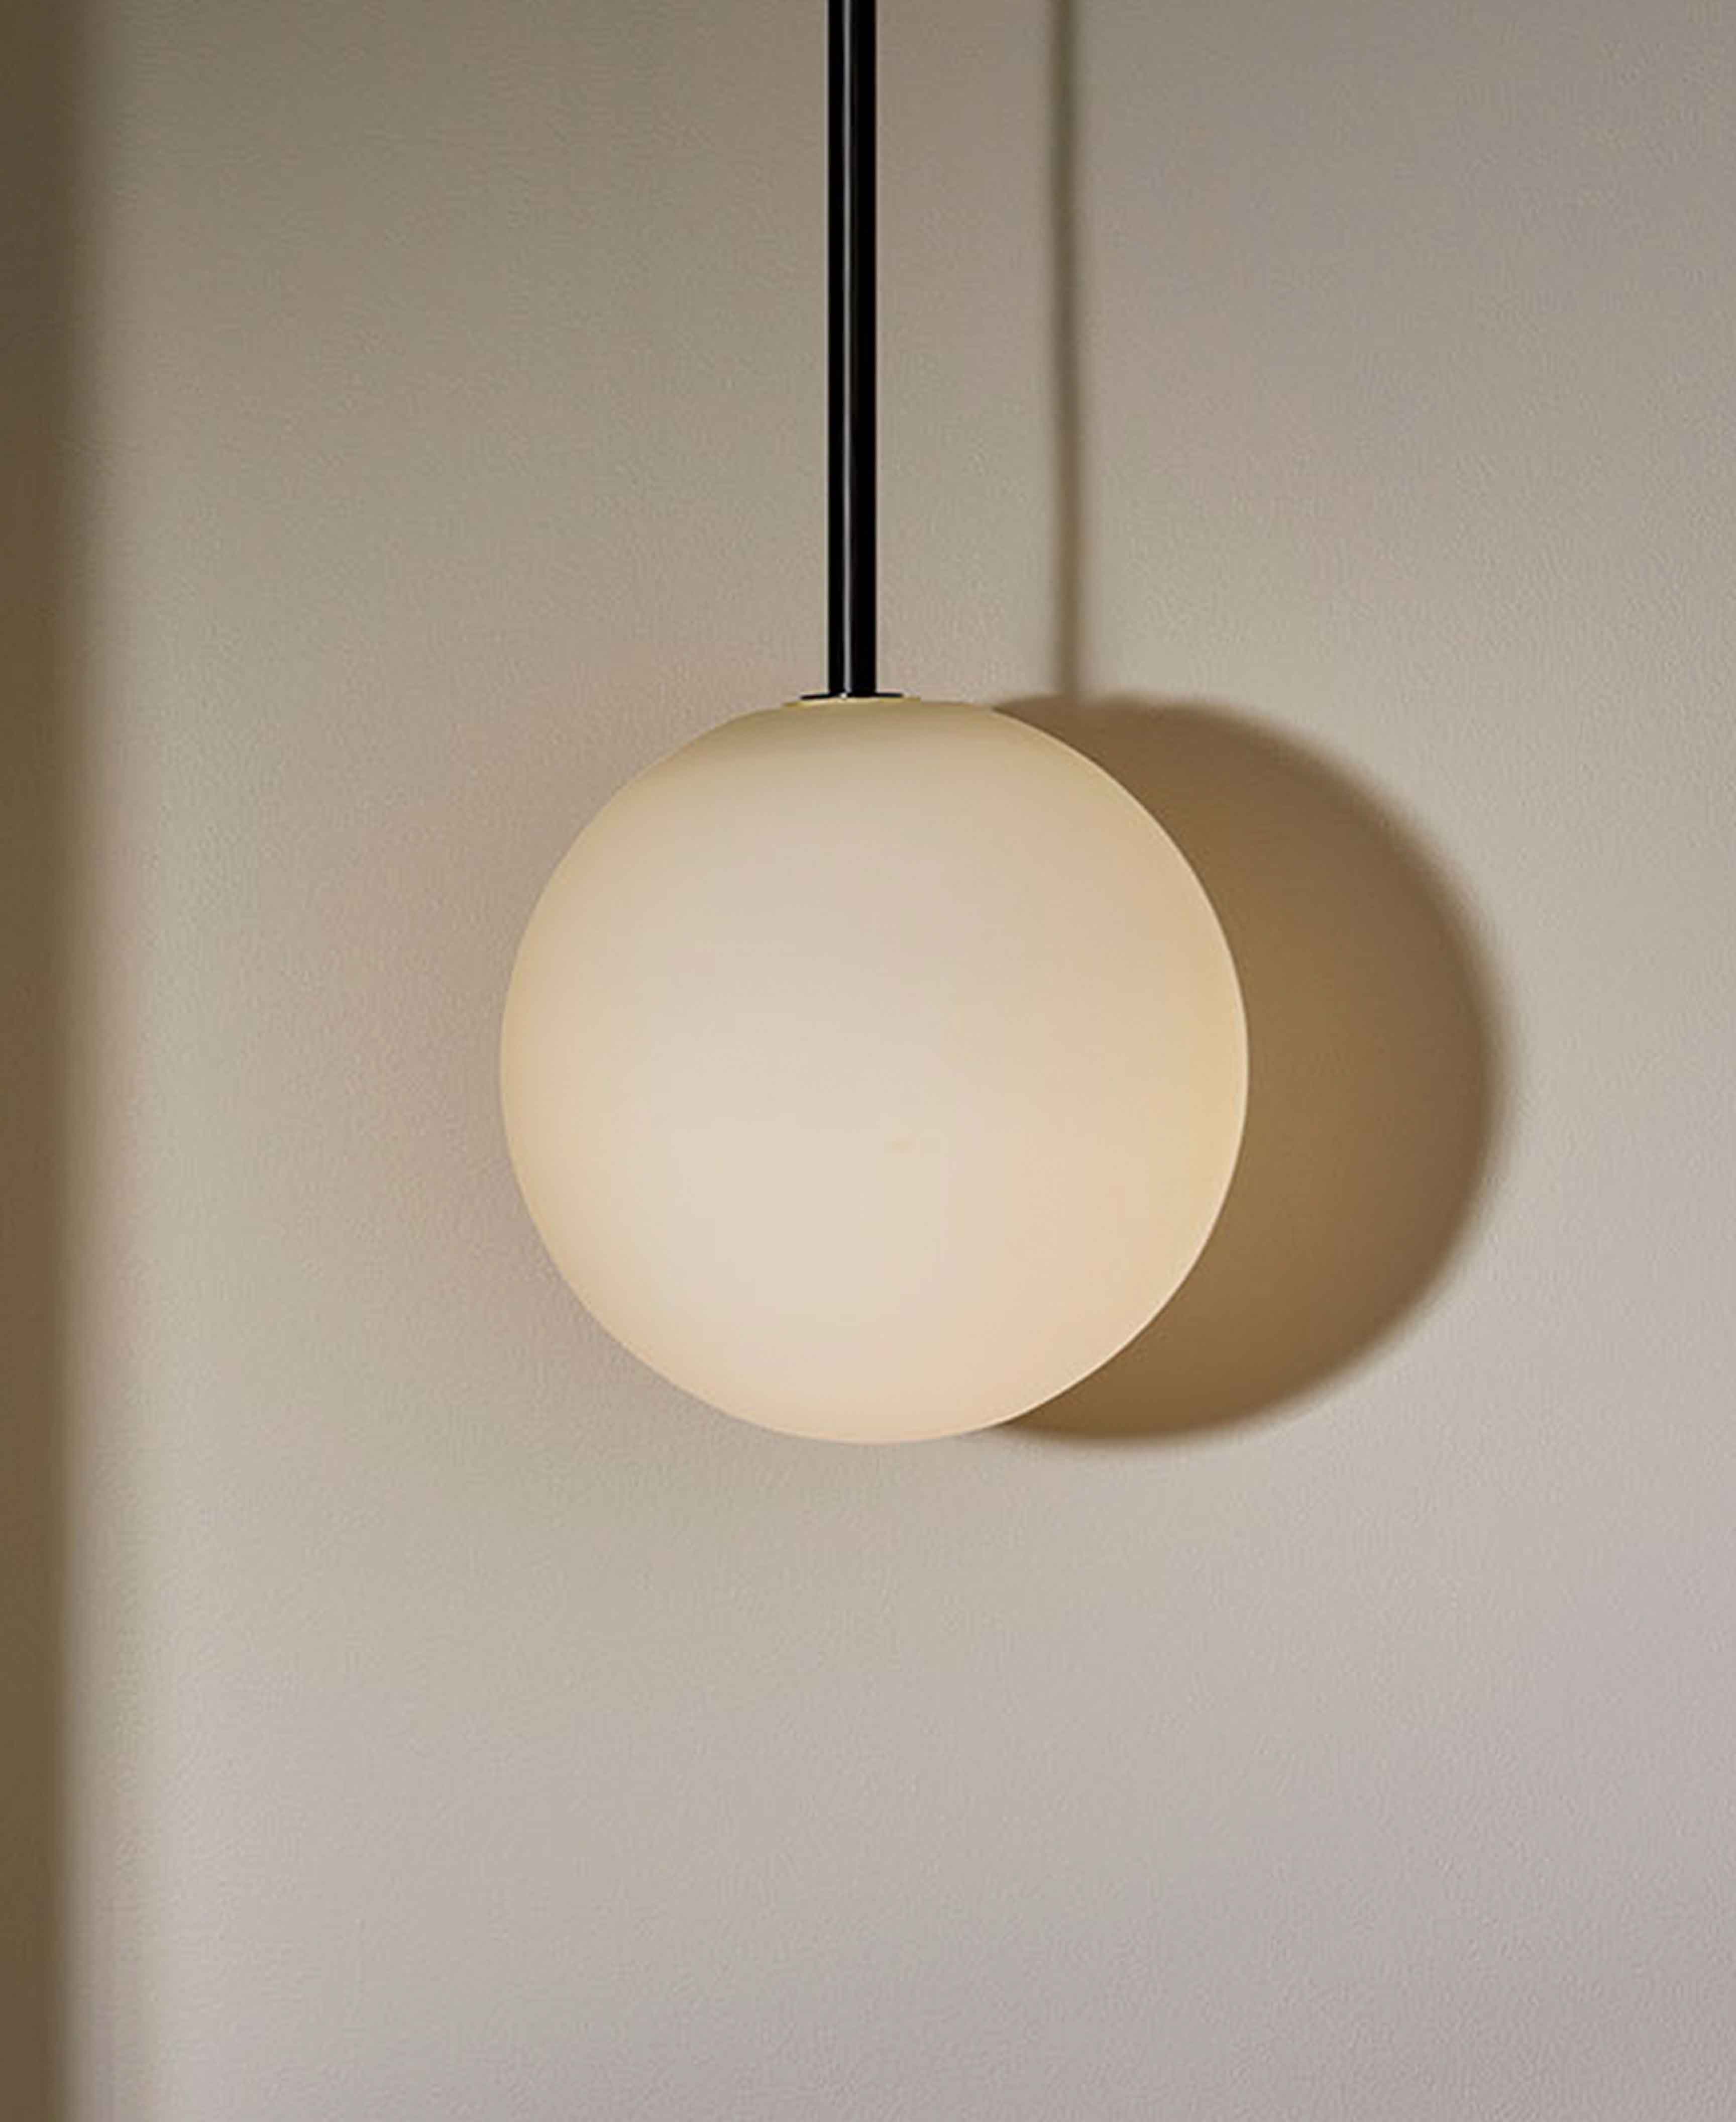 Marz Designs Orb Pendant, Large in White Frosted and Brushed Black